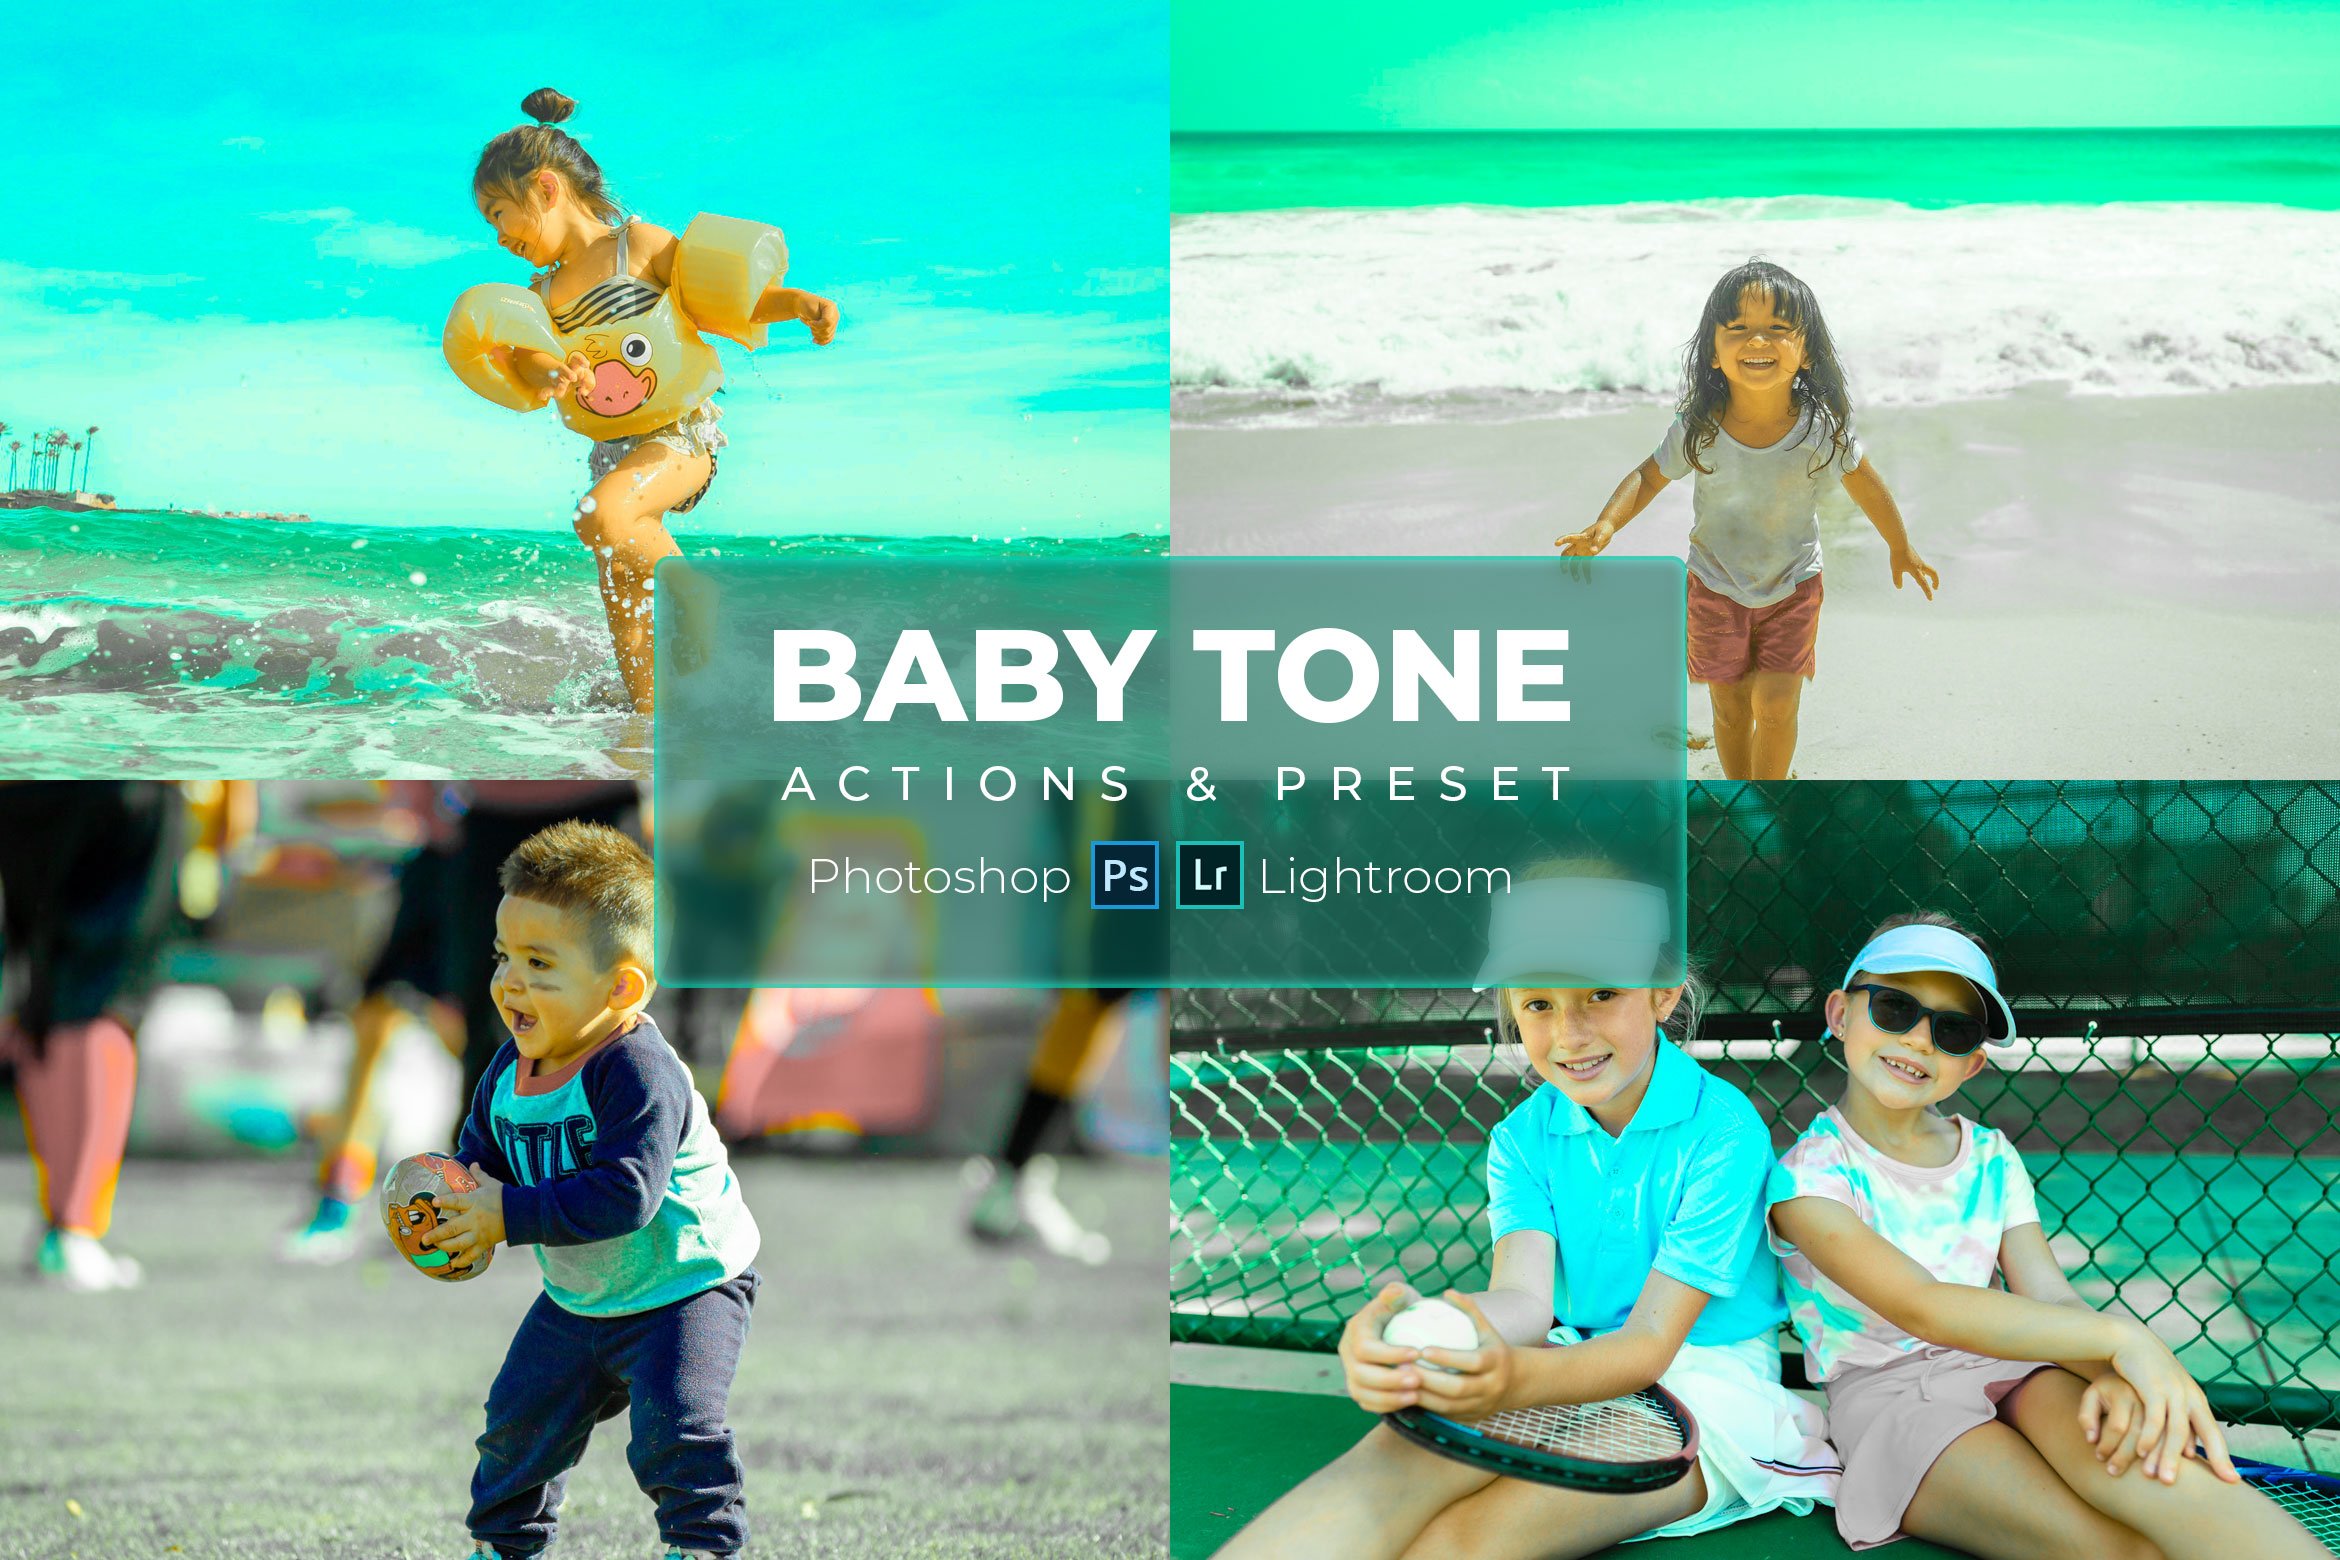 Presets Lightroom & Action Baby Tonecover image.